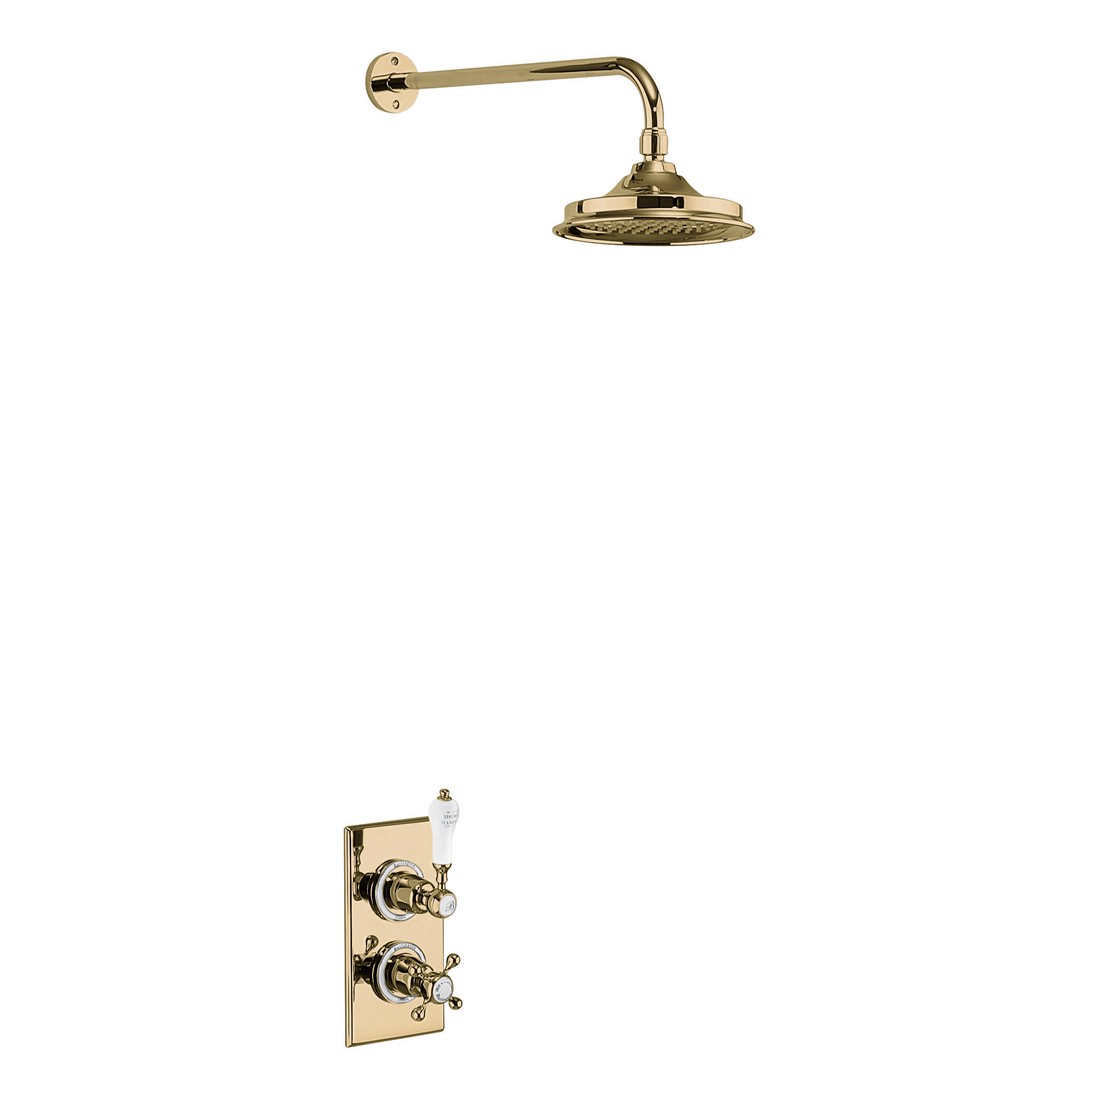 Burlington TF1SGOLD Trent Thermostatic Concealed Single Outlet Shower Valve with Fixed Shower Arm Gold/White (Shower Head NOT Included)